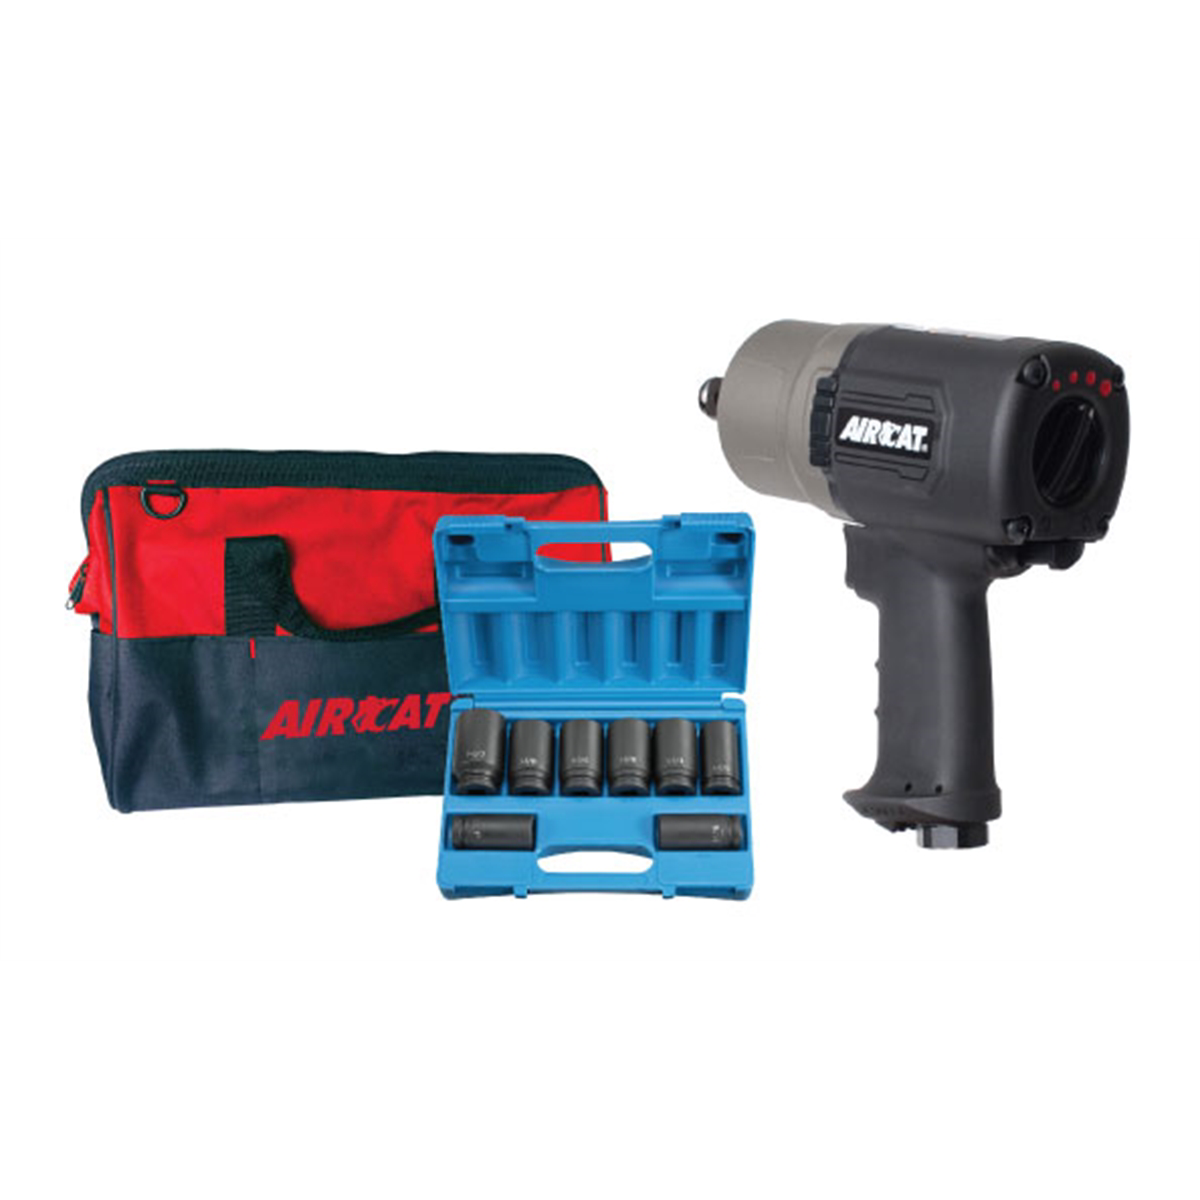 AIRCAT 3/4" COMPACT 'SUPER DUTY" IMPACT WRENCH KIT